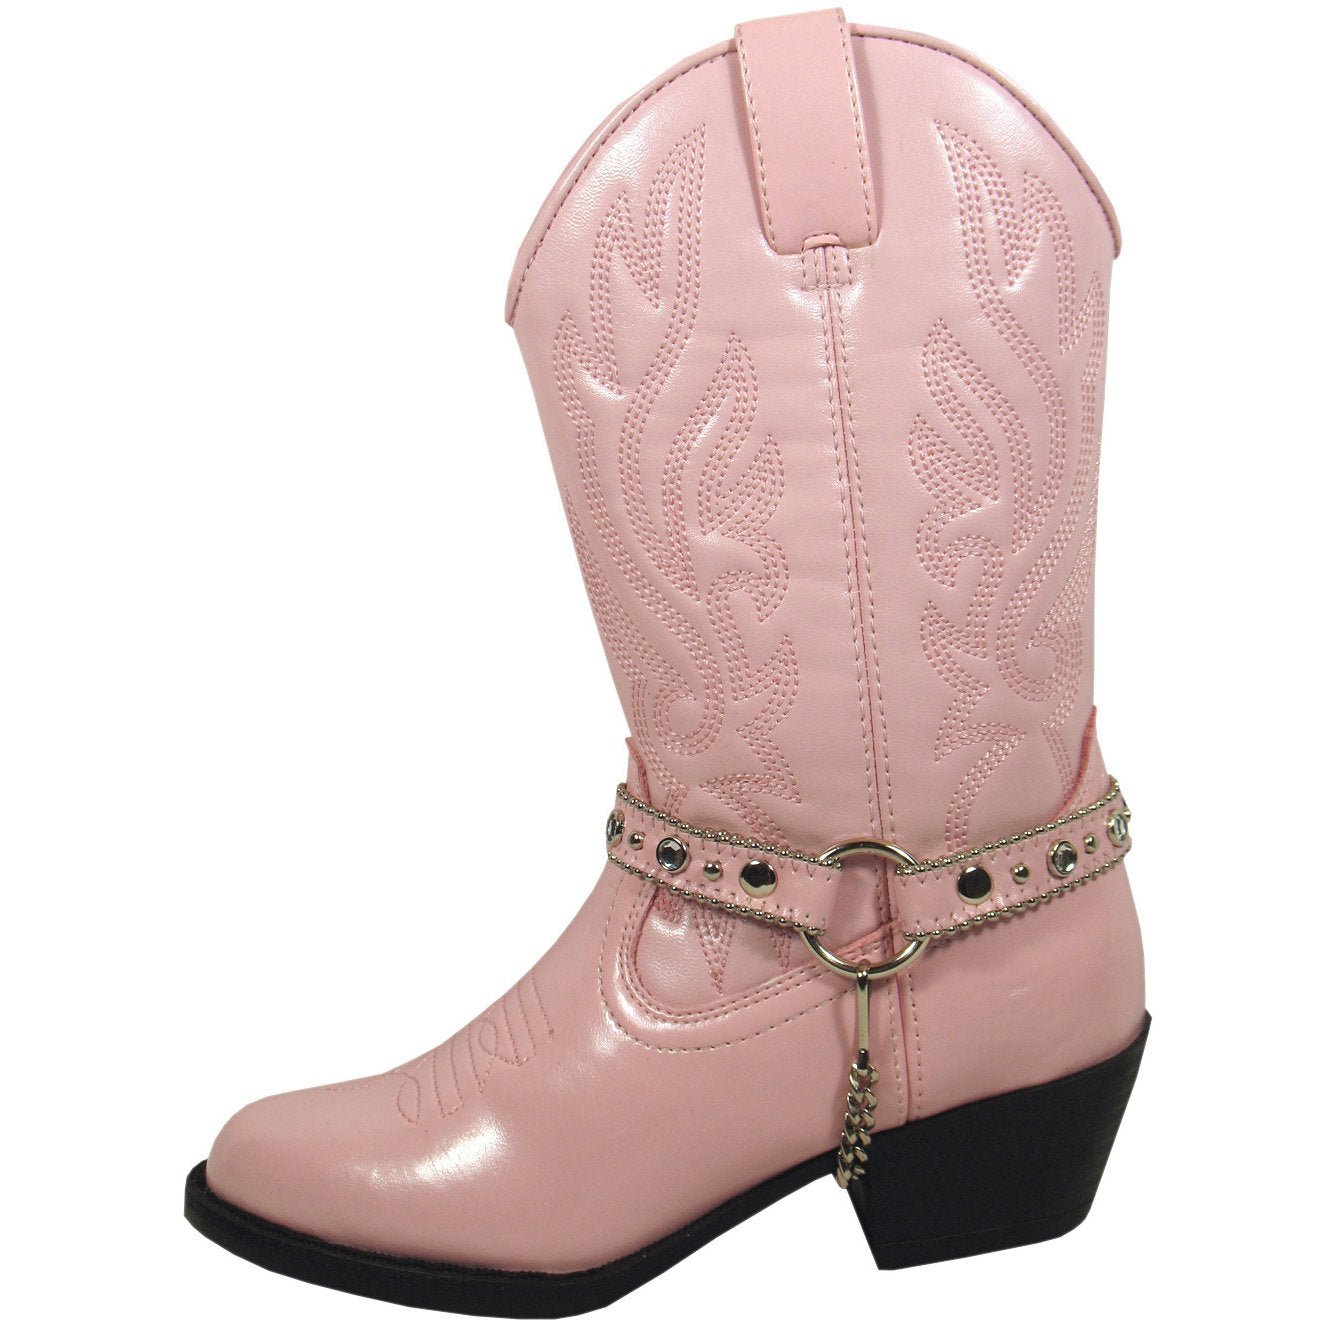 Smoky Mountain Girl's Youth Pink Western Boot